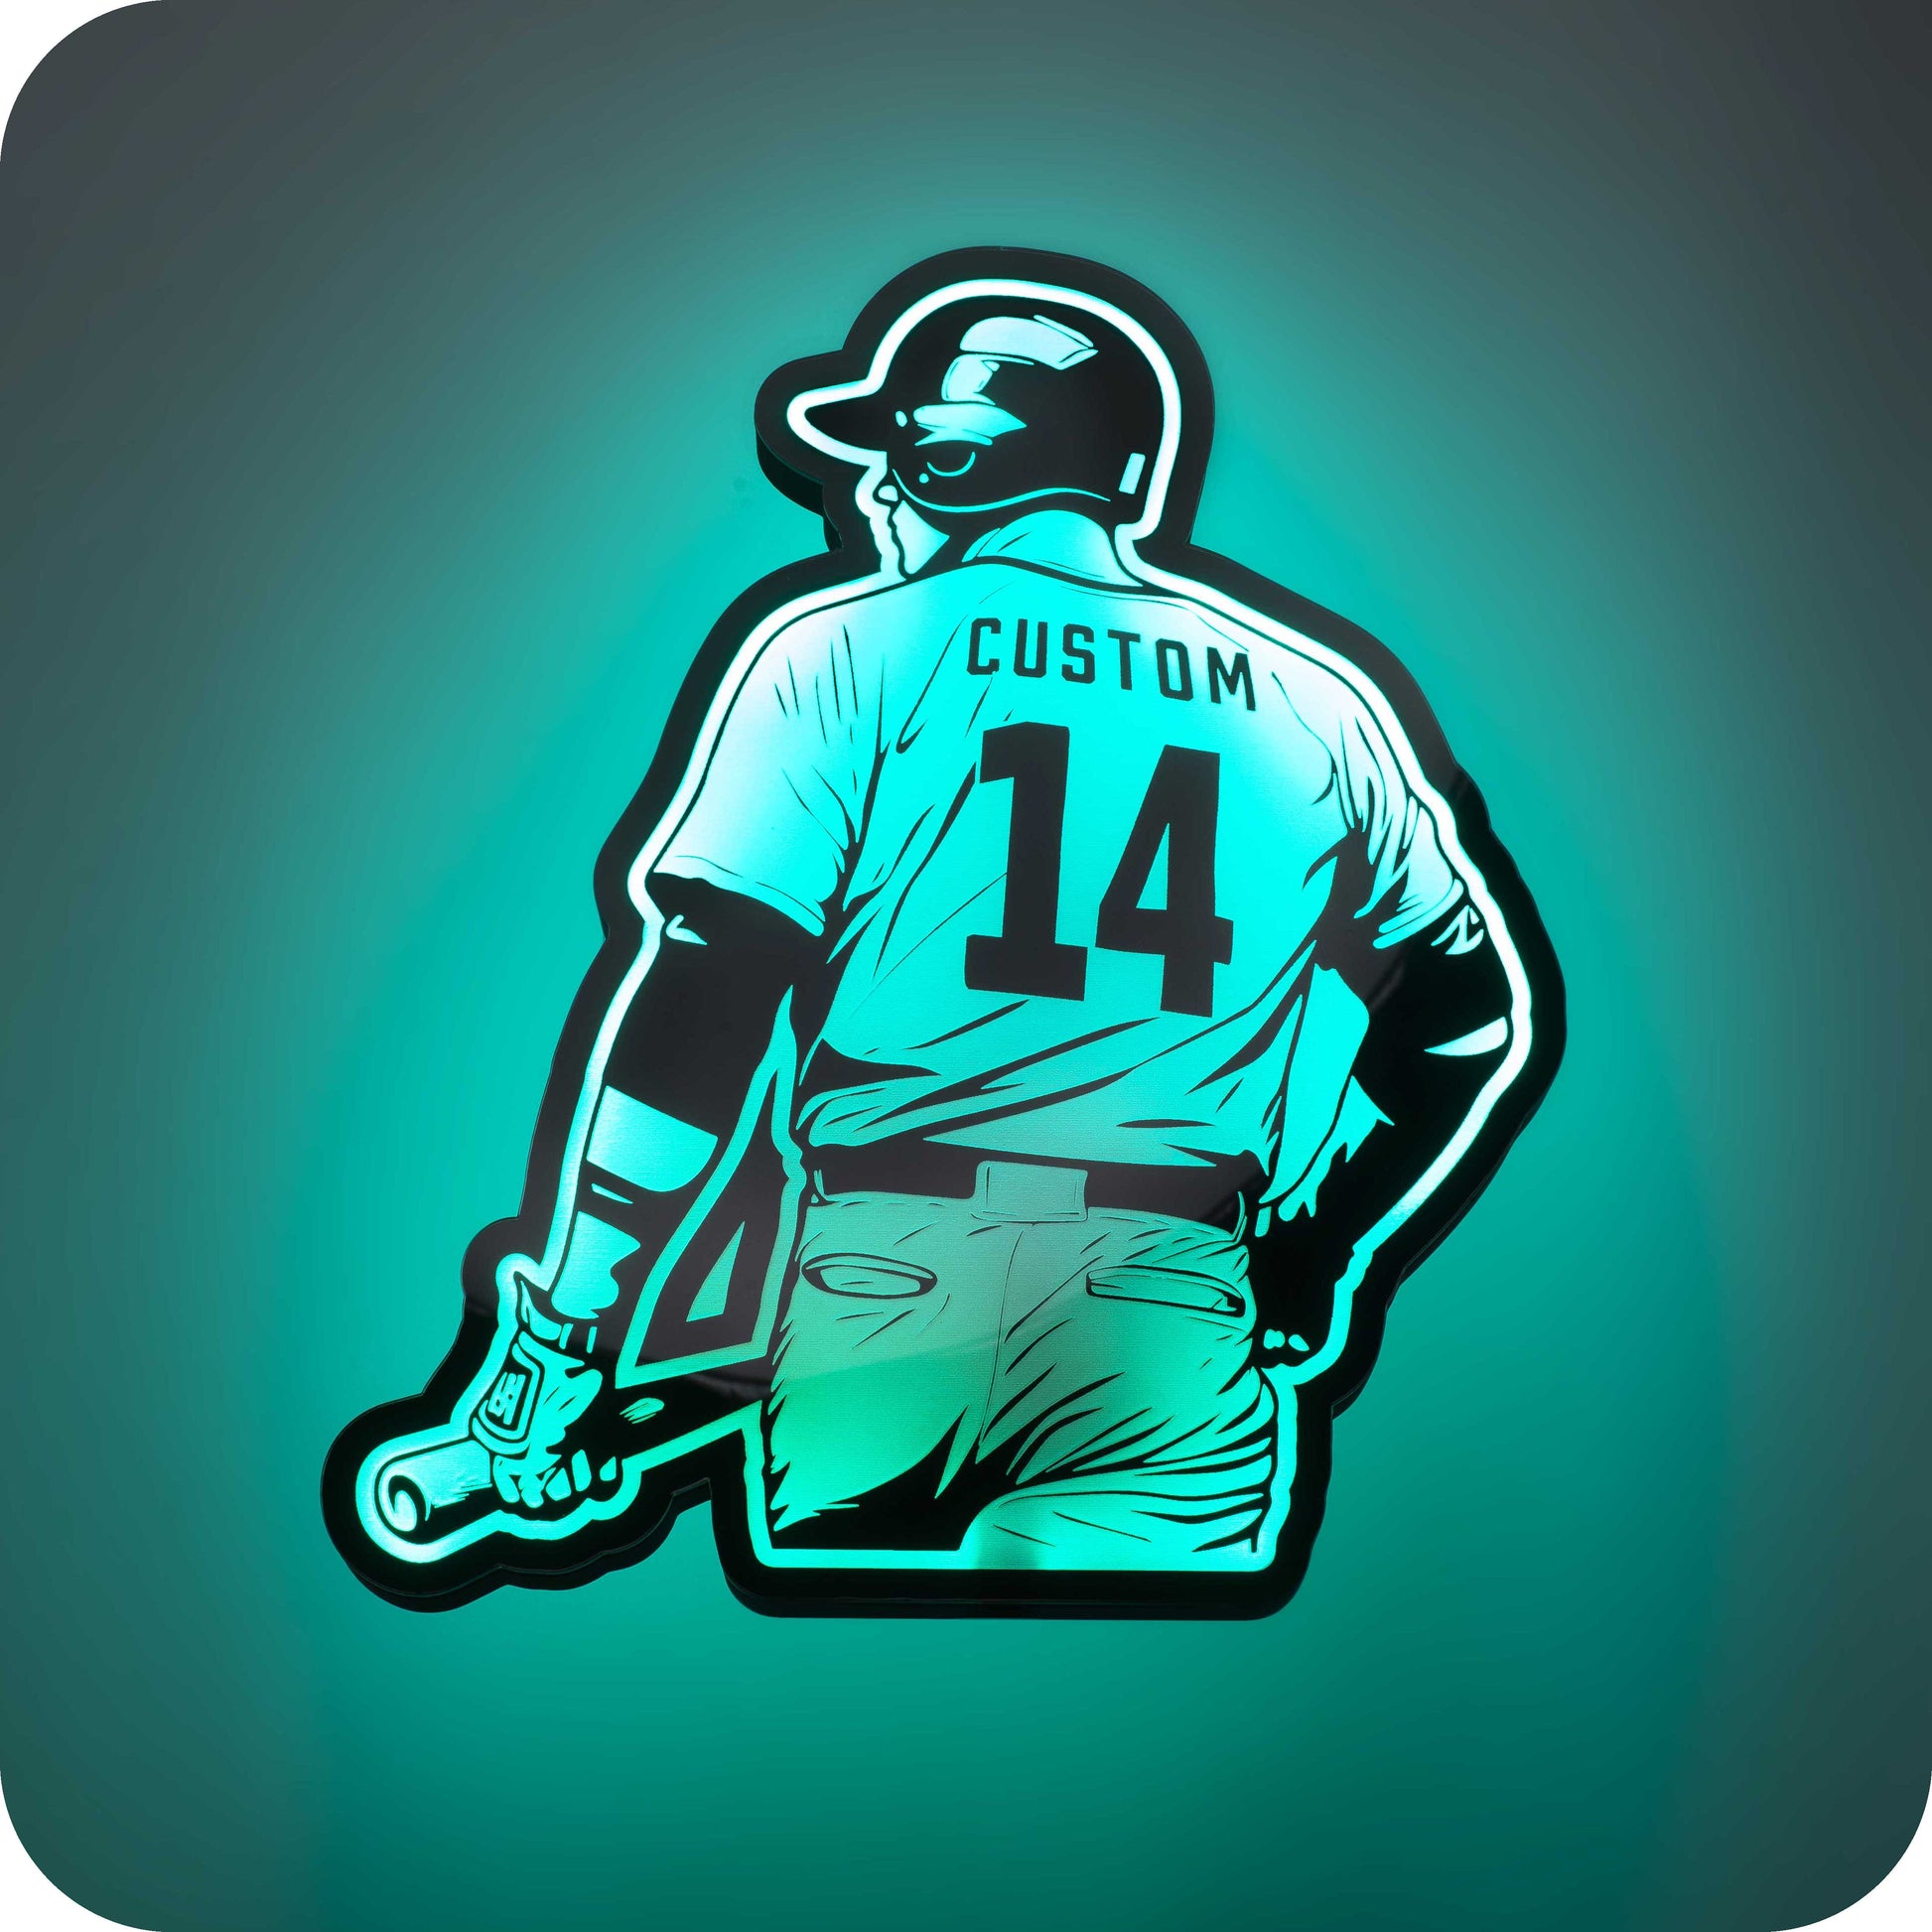 a 3d wall mounted acrylic light, back-lit by  multi-color led lights, featuring a cartoon style illustration of baseball player holding his bat, view from behind showing the back of the baseball players jersey. The text and number on the back of the jersey can be personalised.